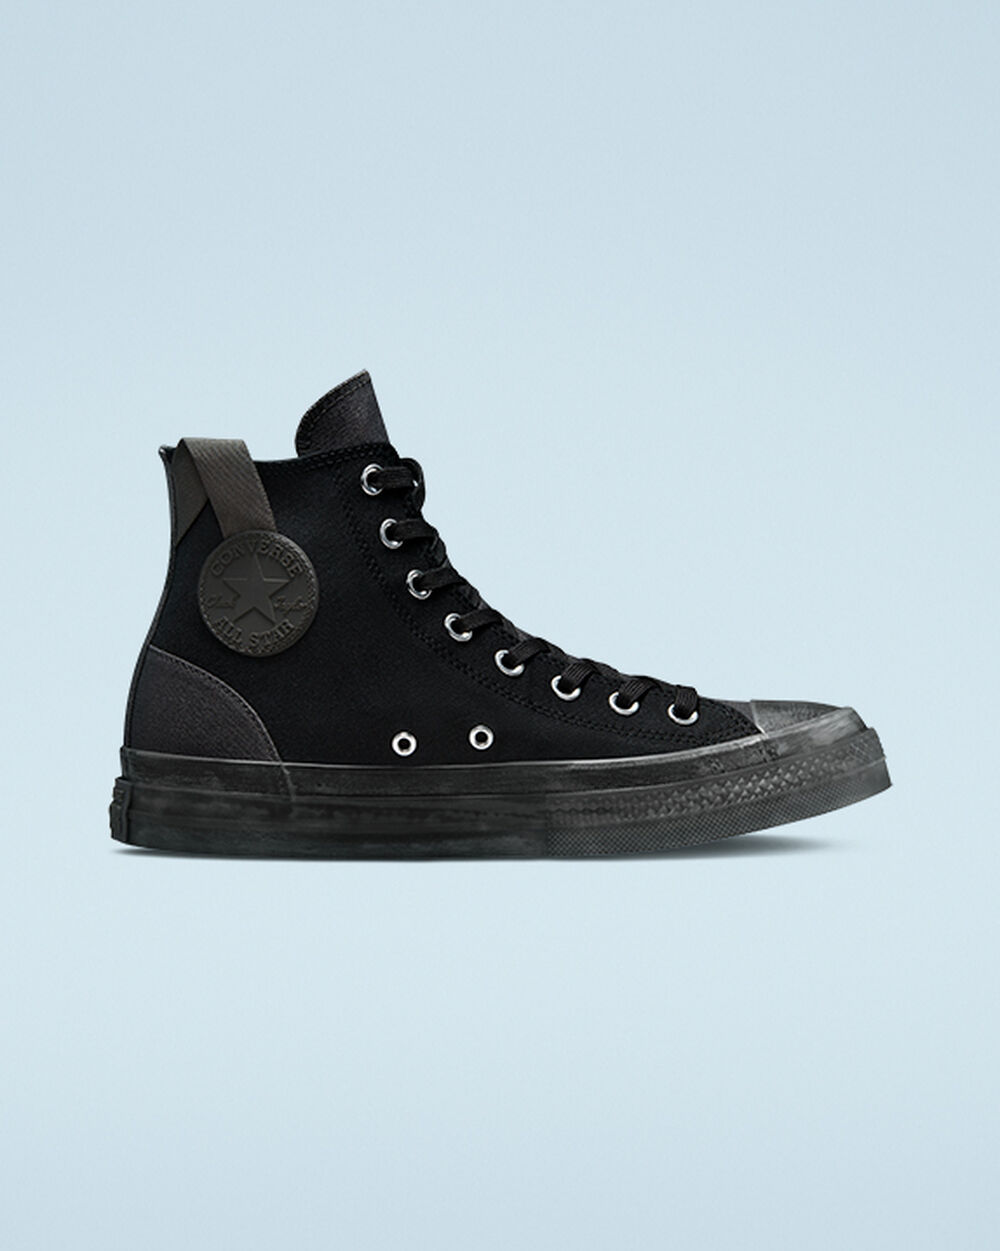 Tenis Converse Chuck Taylor All Star CX Mujer Negros Negros | Mexico-646156